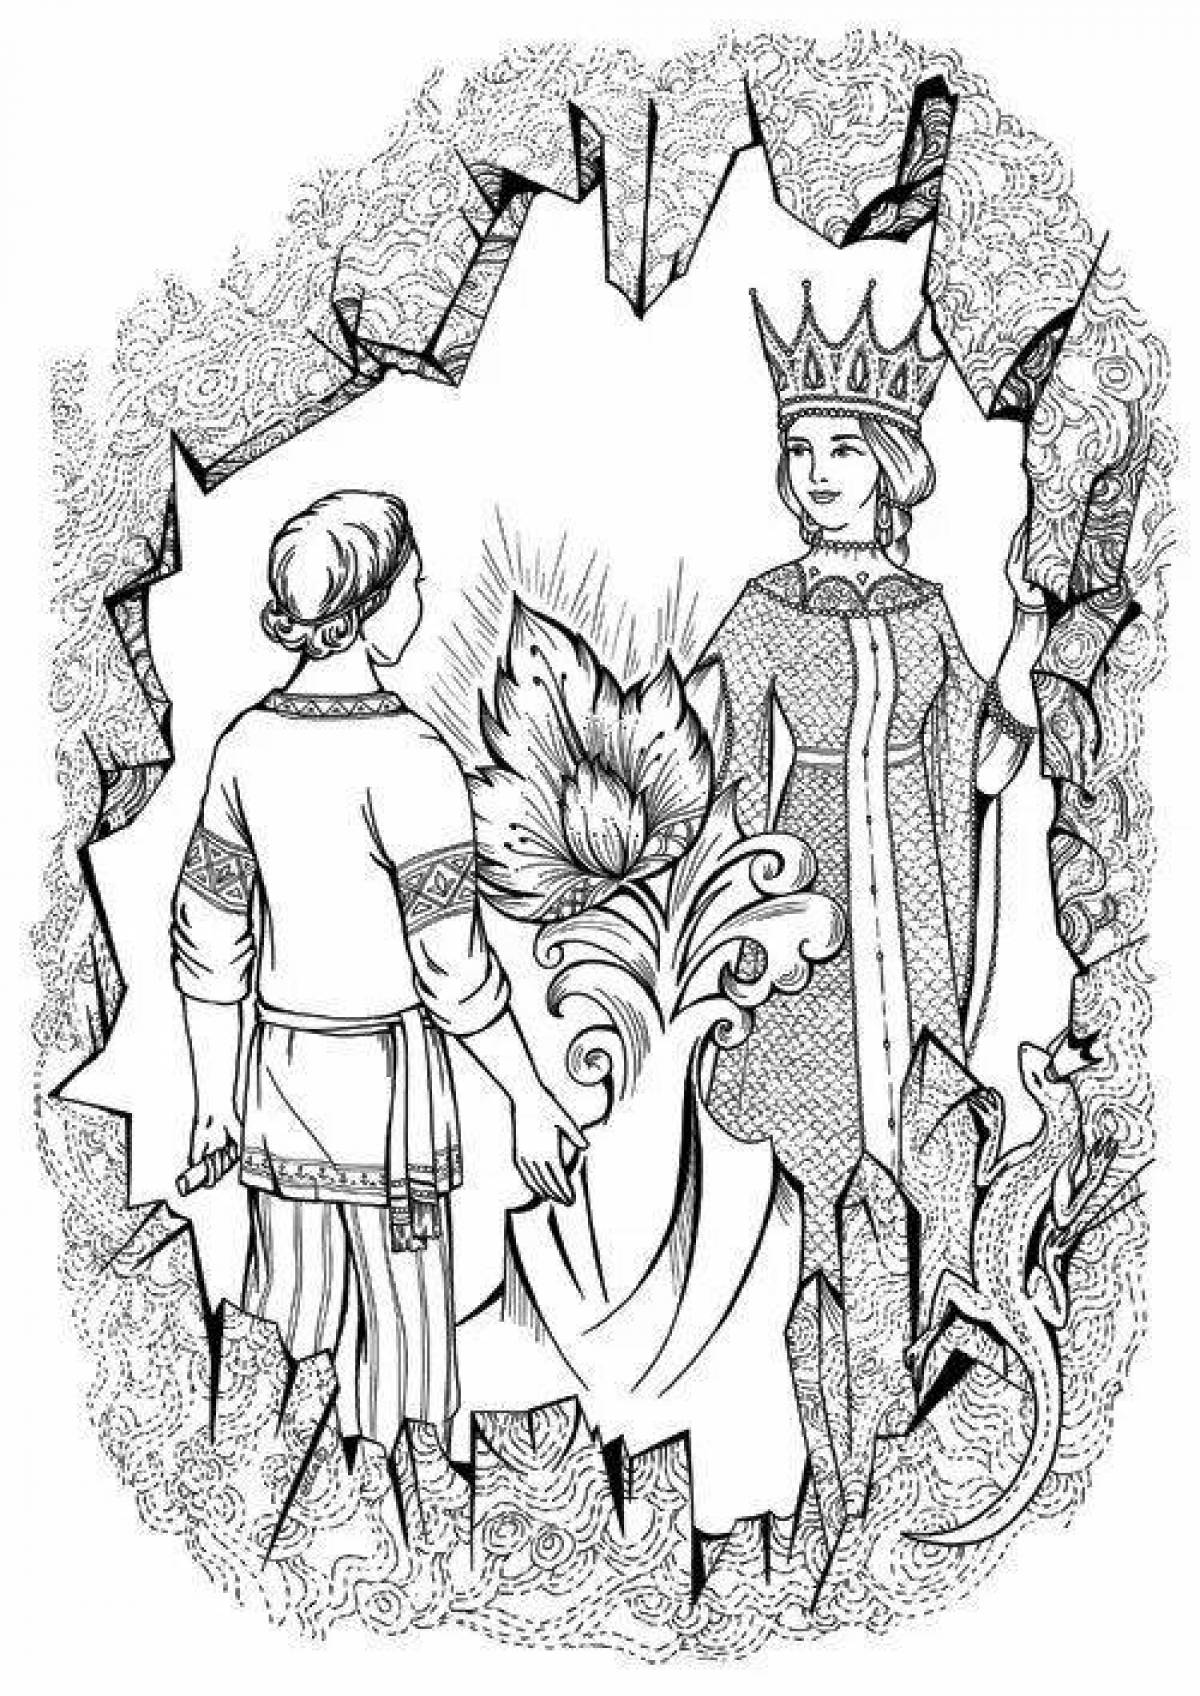 Mystical coloring book based on Bazhov's fairy tales